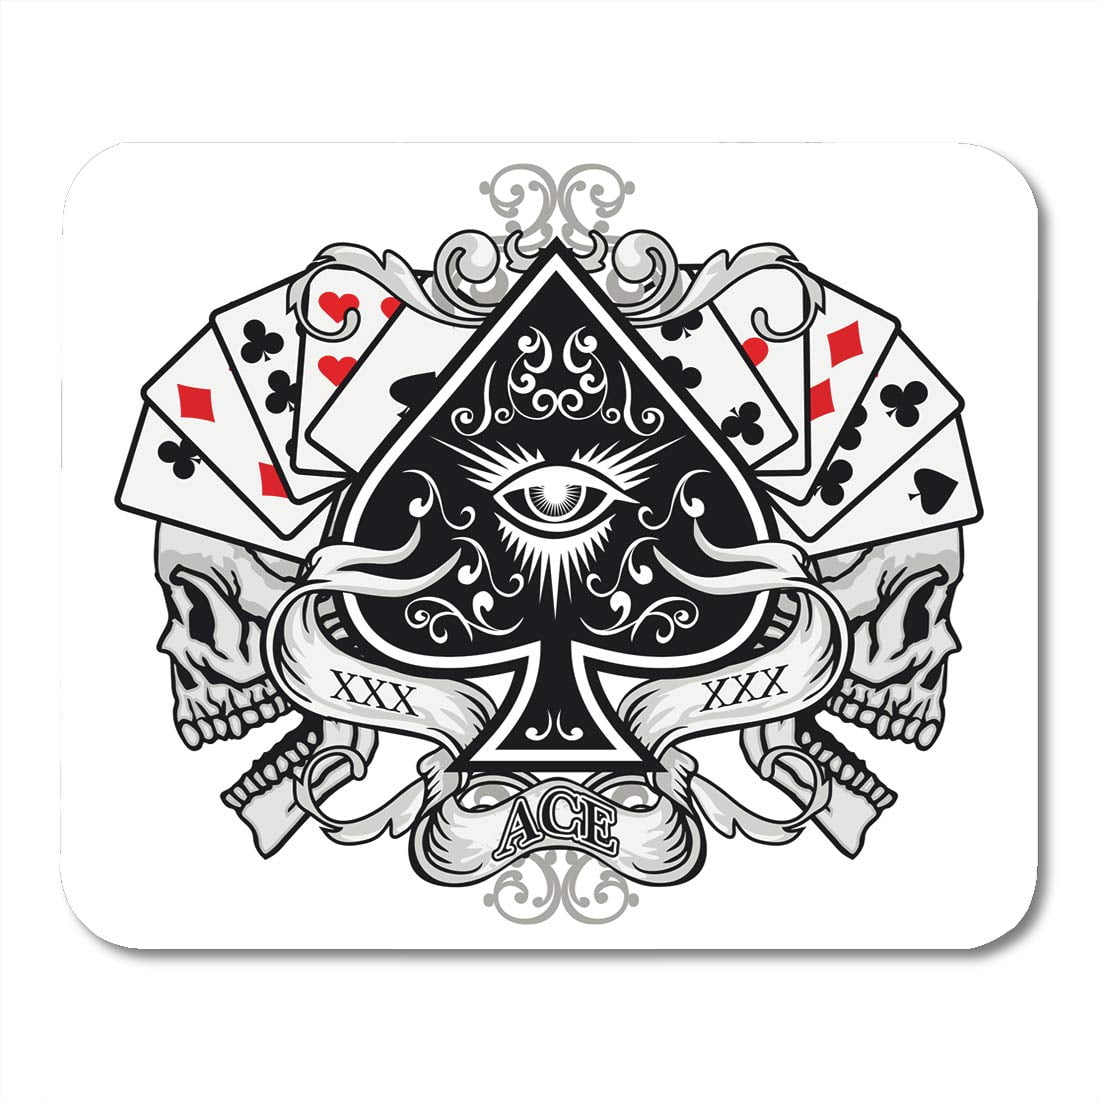 Queen Gothic of Arms Skull and Ace Spades Vintage King Pirate Zombie  Mousepad Mouse Pad Mouse Mat 9x10 inch - Walmart.com